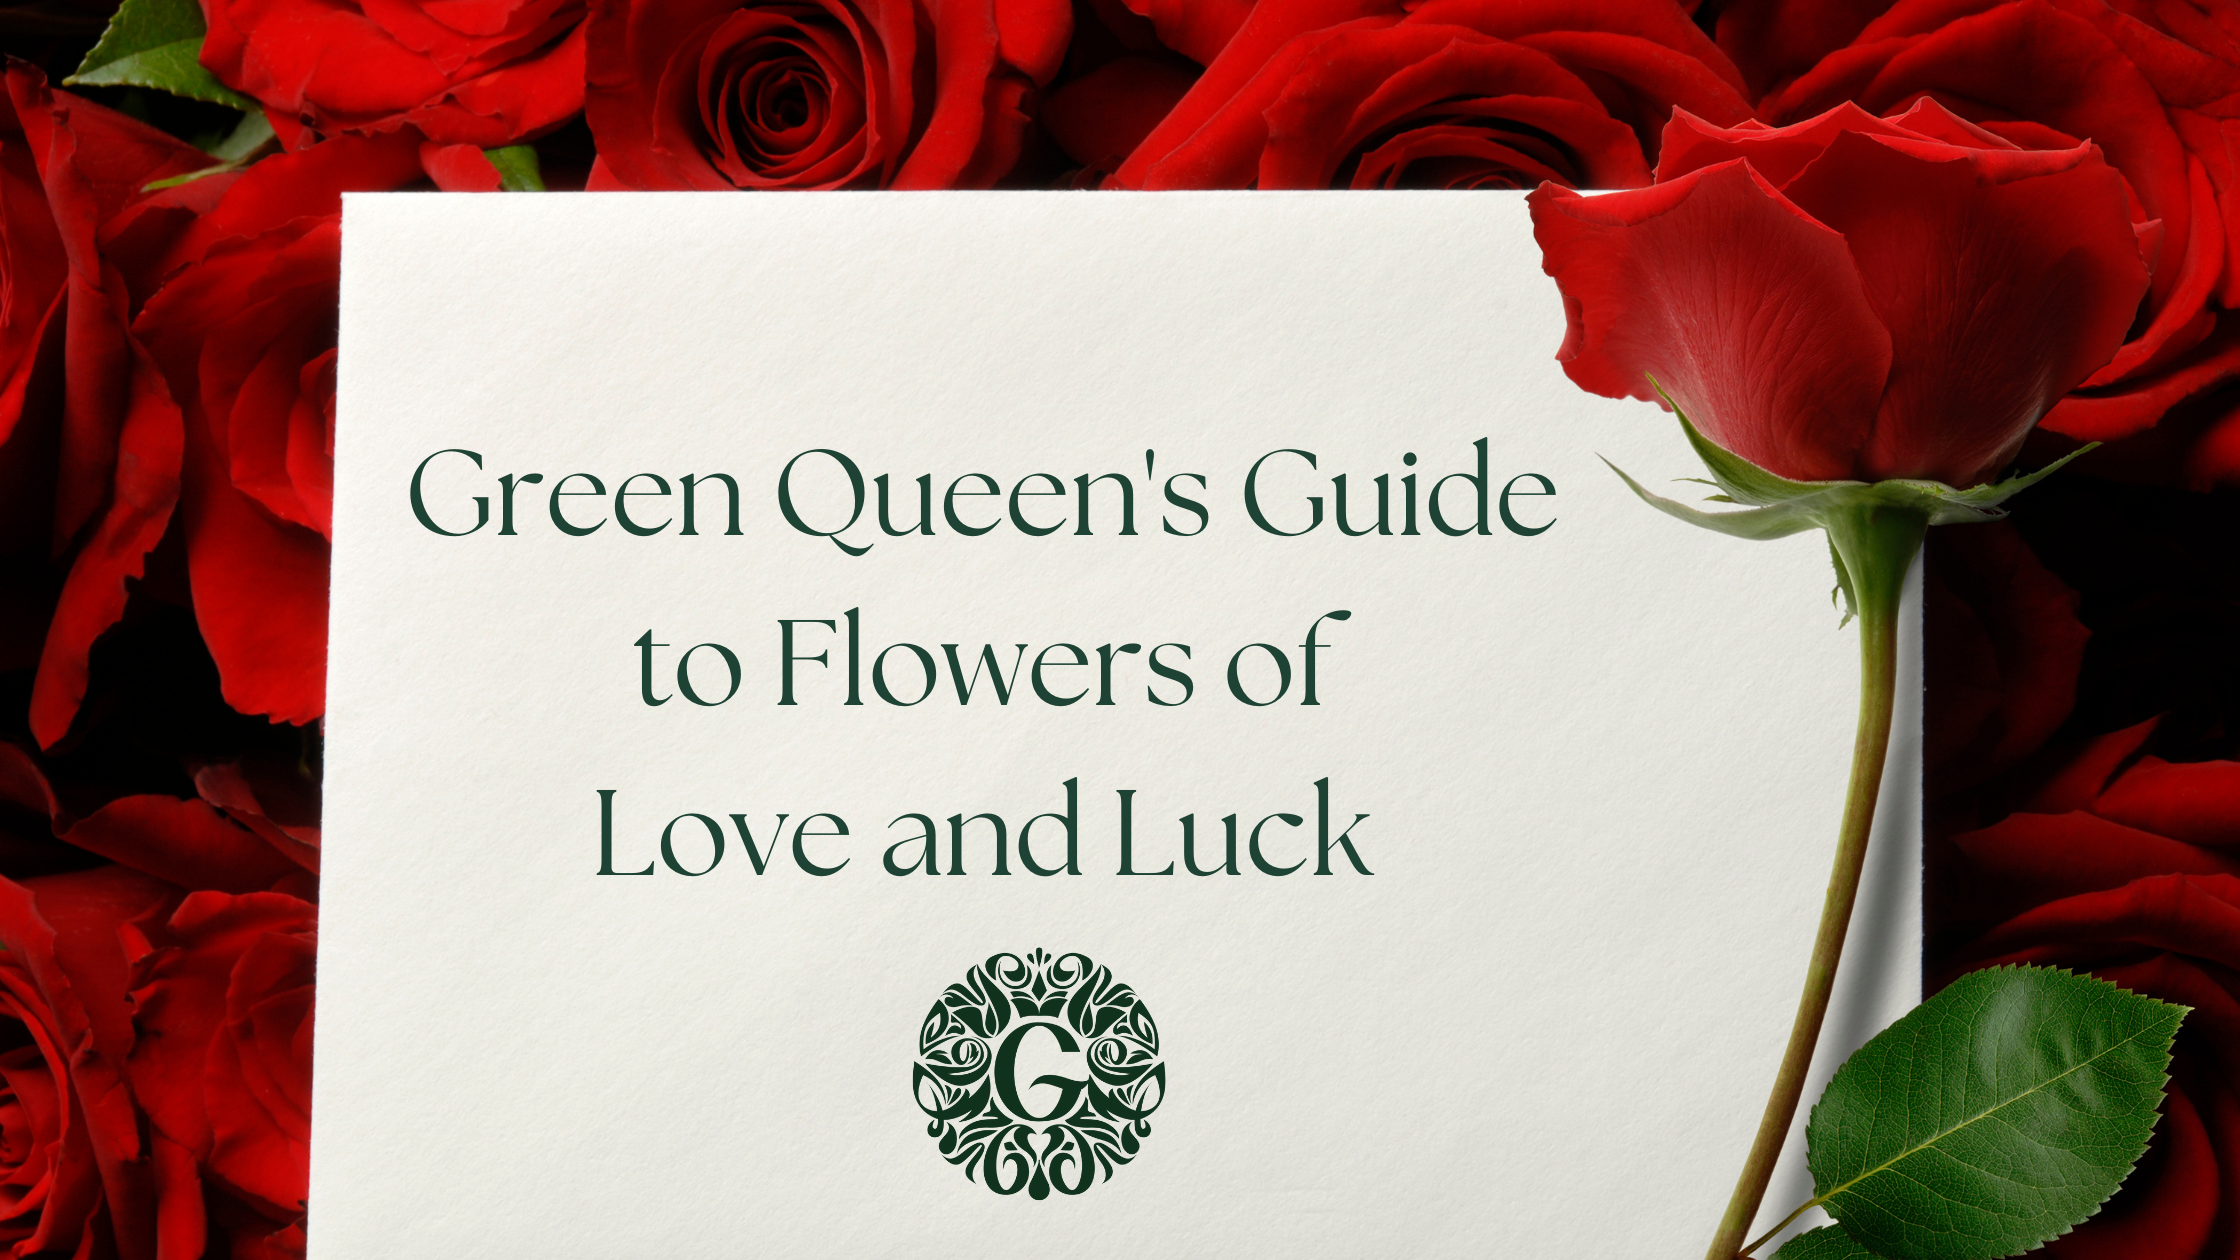 Green Queens Guide to Flowers of Love and Luck